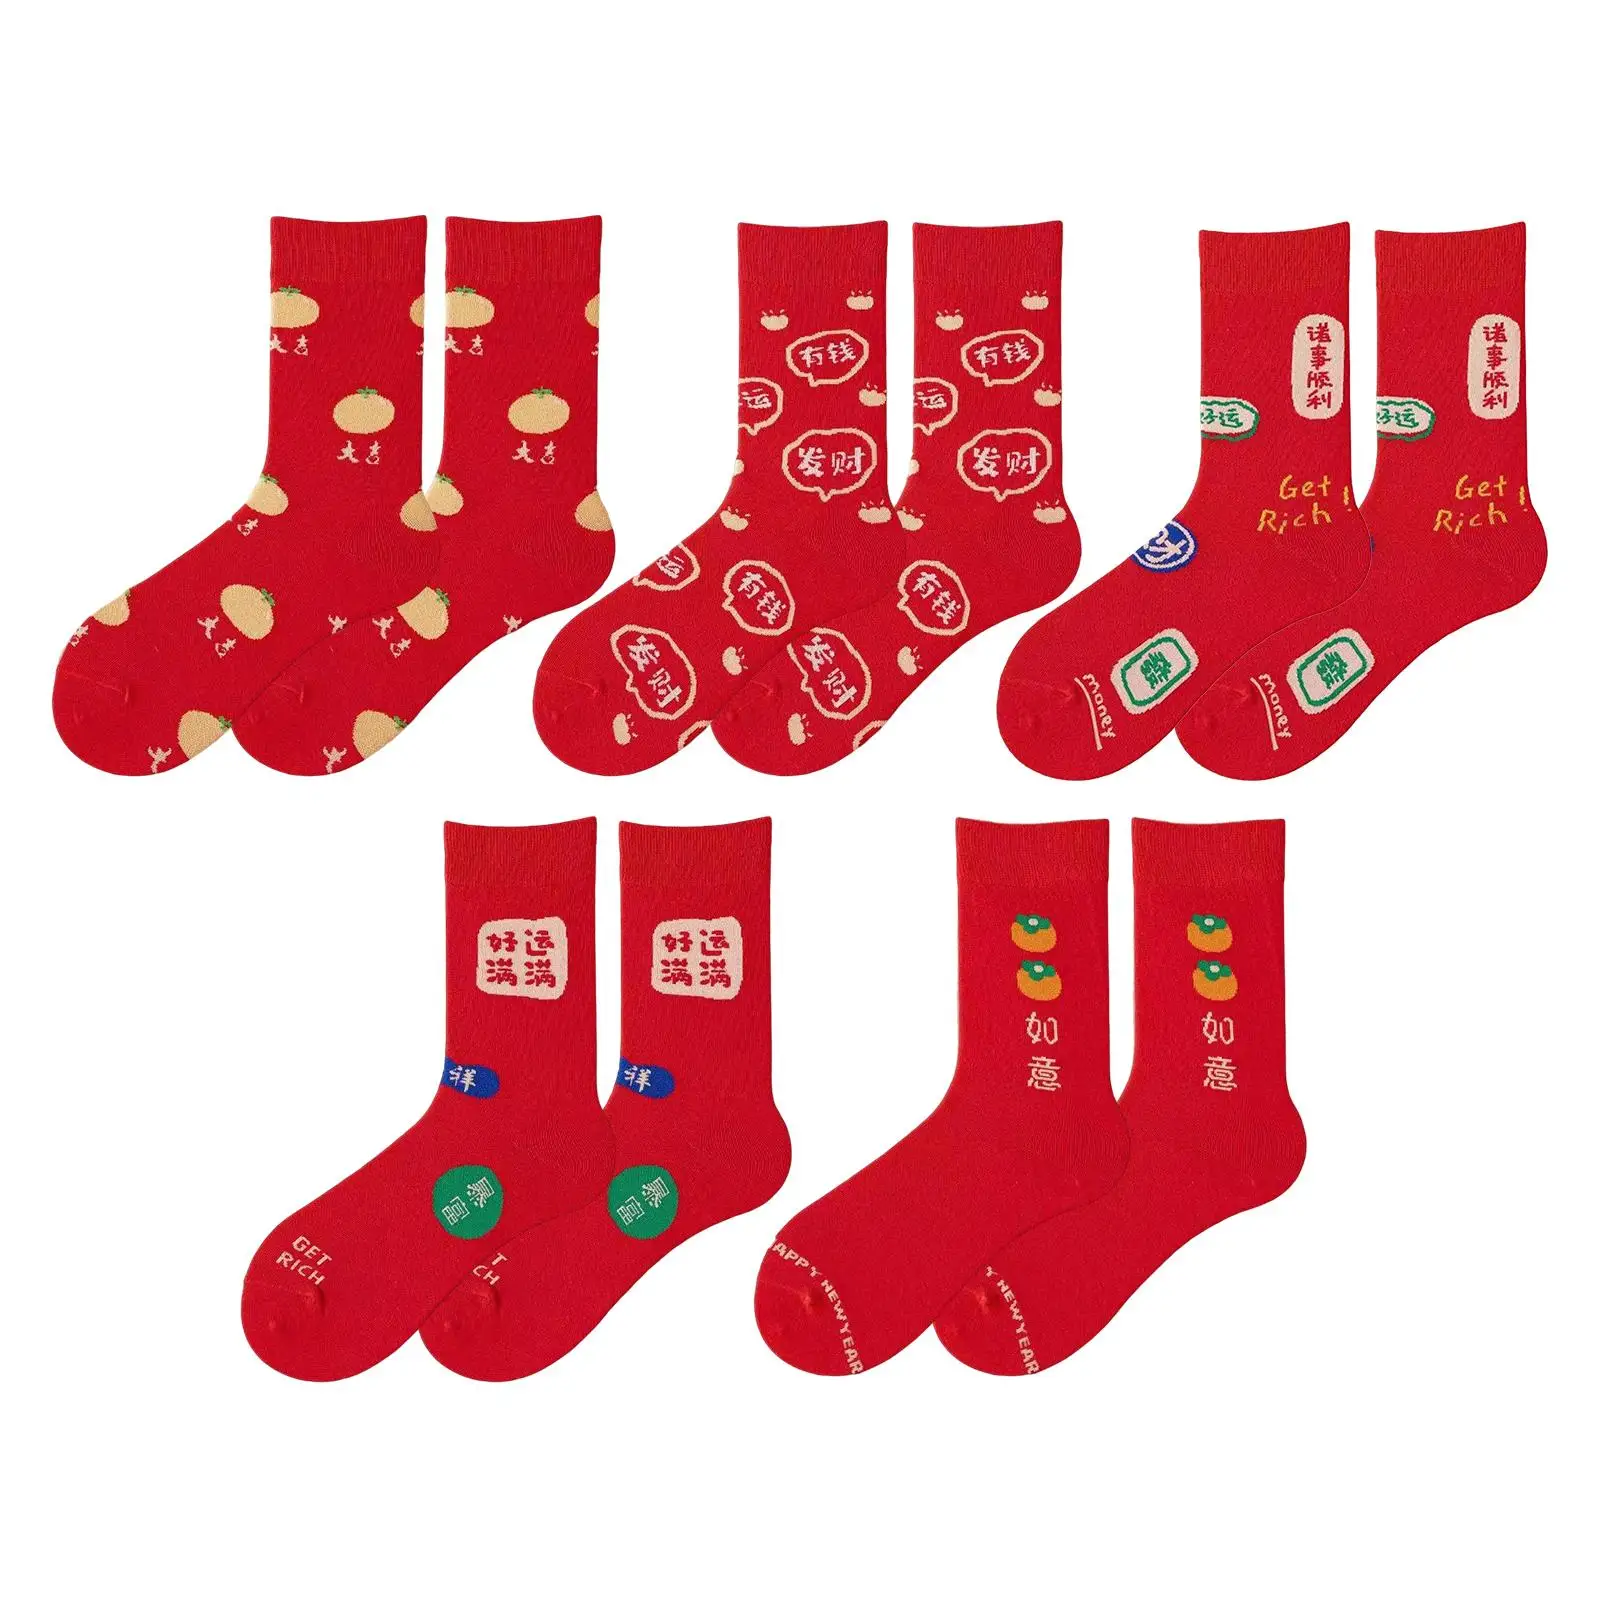 5 Pairs Red Socks with Chinese Characters Novelty Gifts Breathable Soft Warm Stockings Ankle Socks for Spring Festival Socks